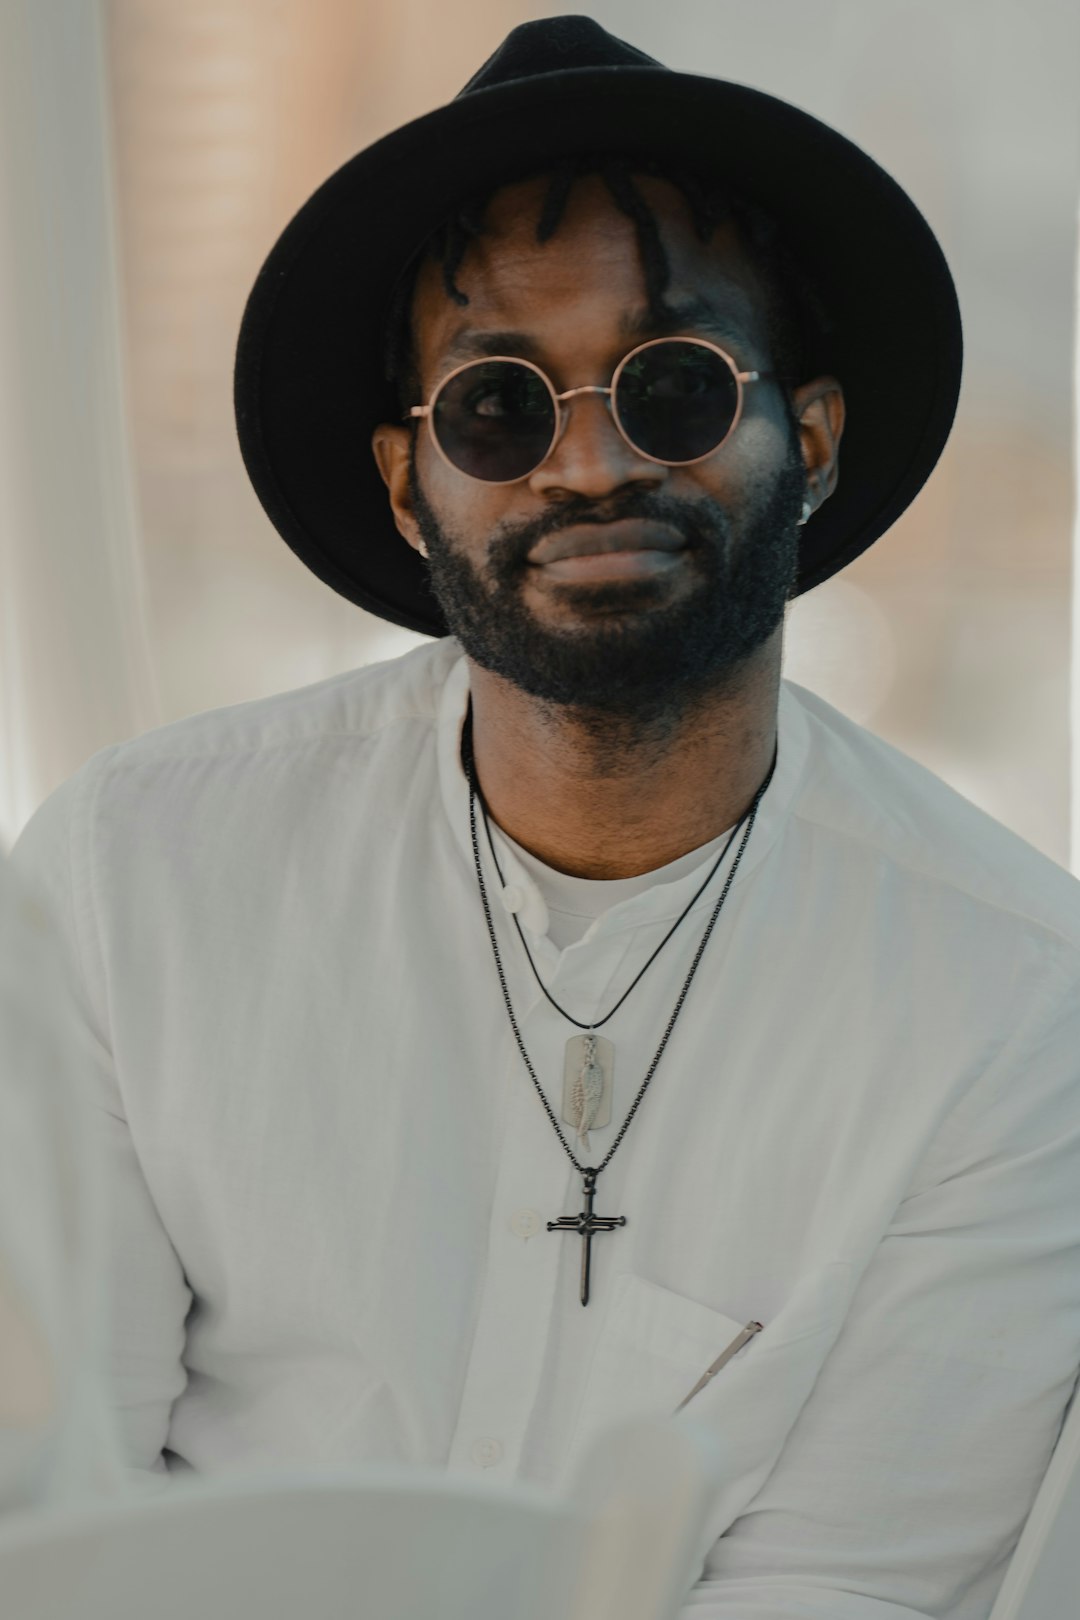 man in white button up shirt wearing black sunglasses and black hat